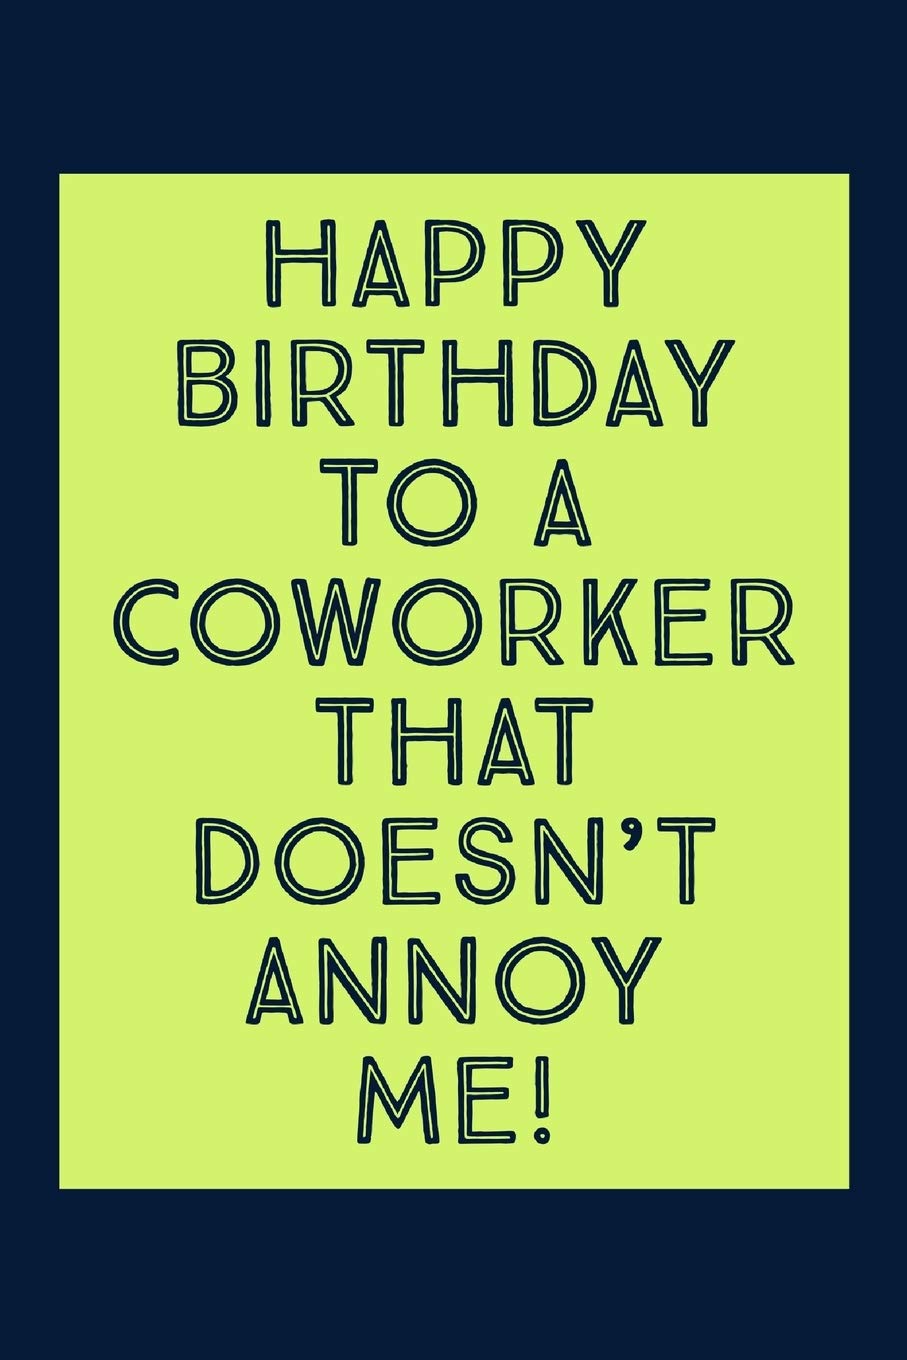 60 Cool Birthday Wishes For Coworker Birthday Images